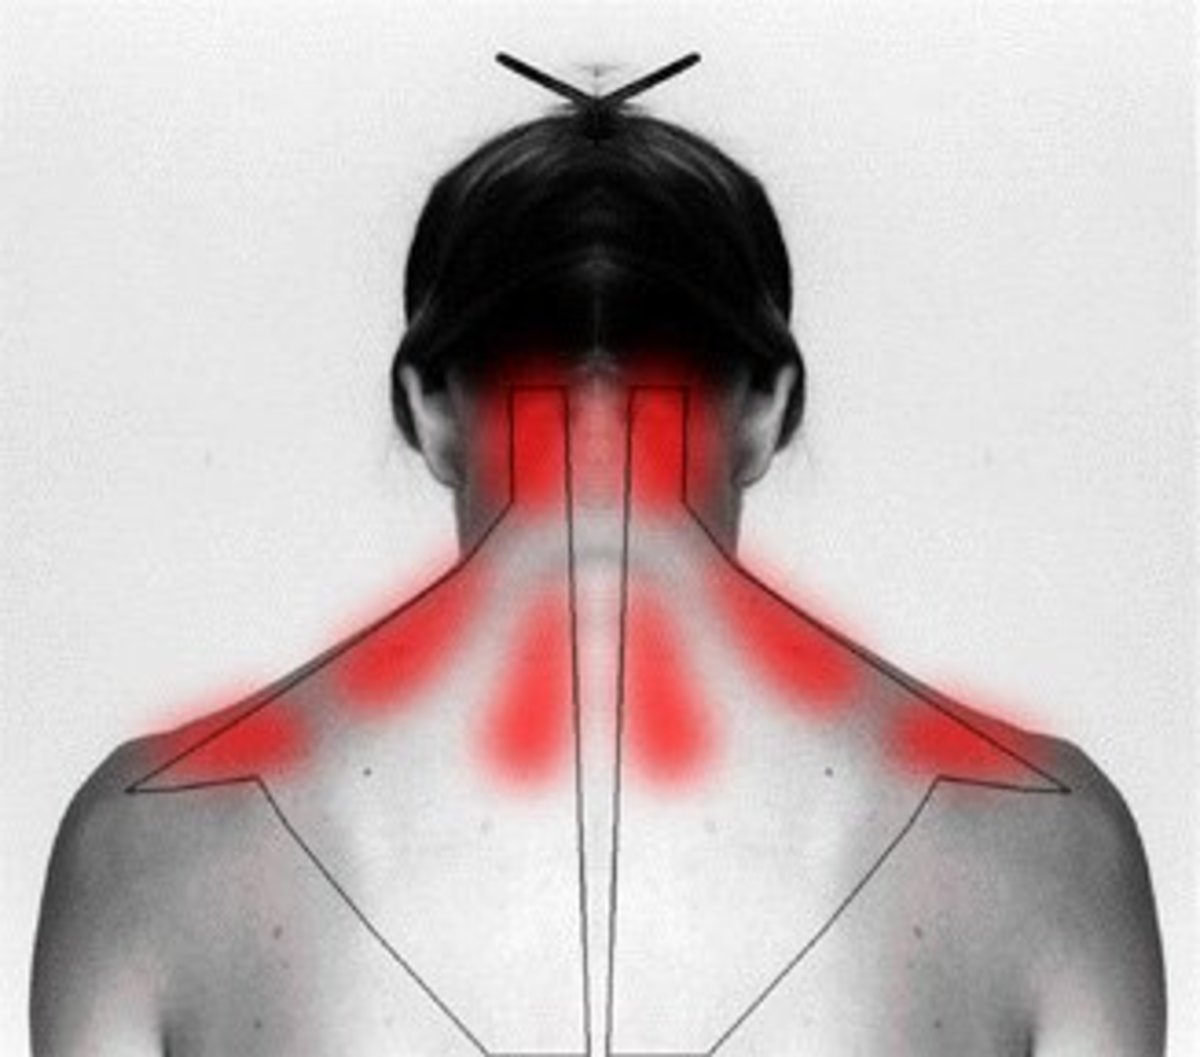 How To Cure Head Ache And Neck Pain With Passive Spine And Neck Stretch To Ease The Pain 